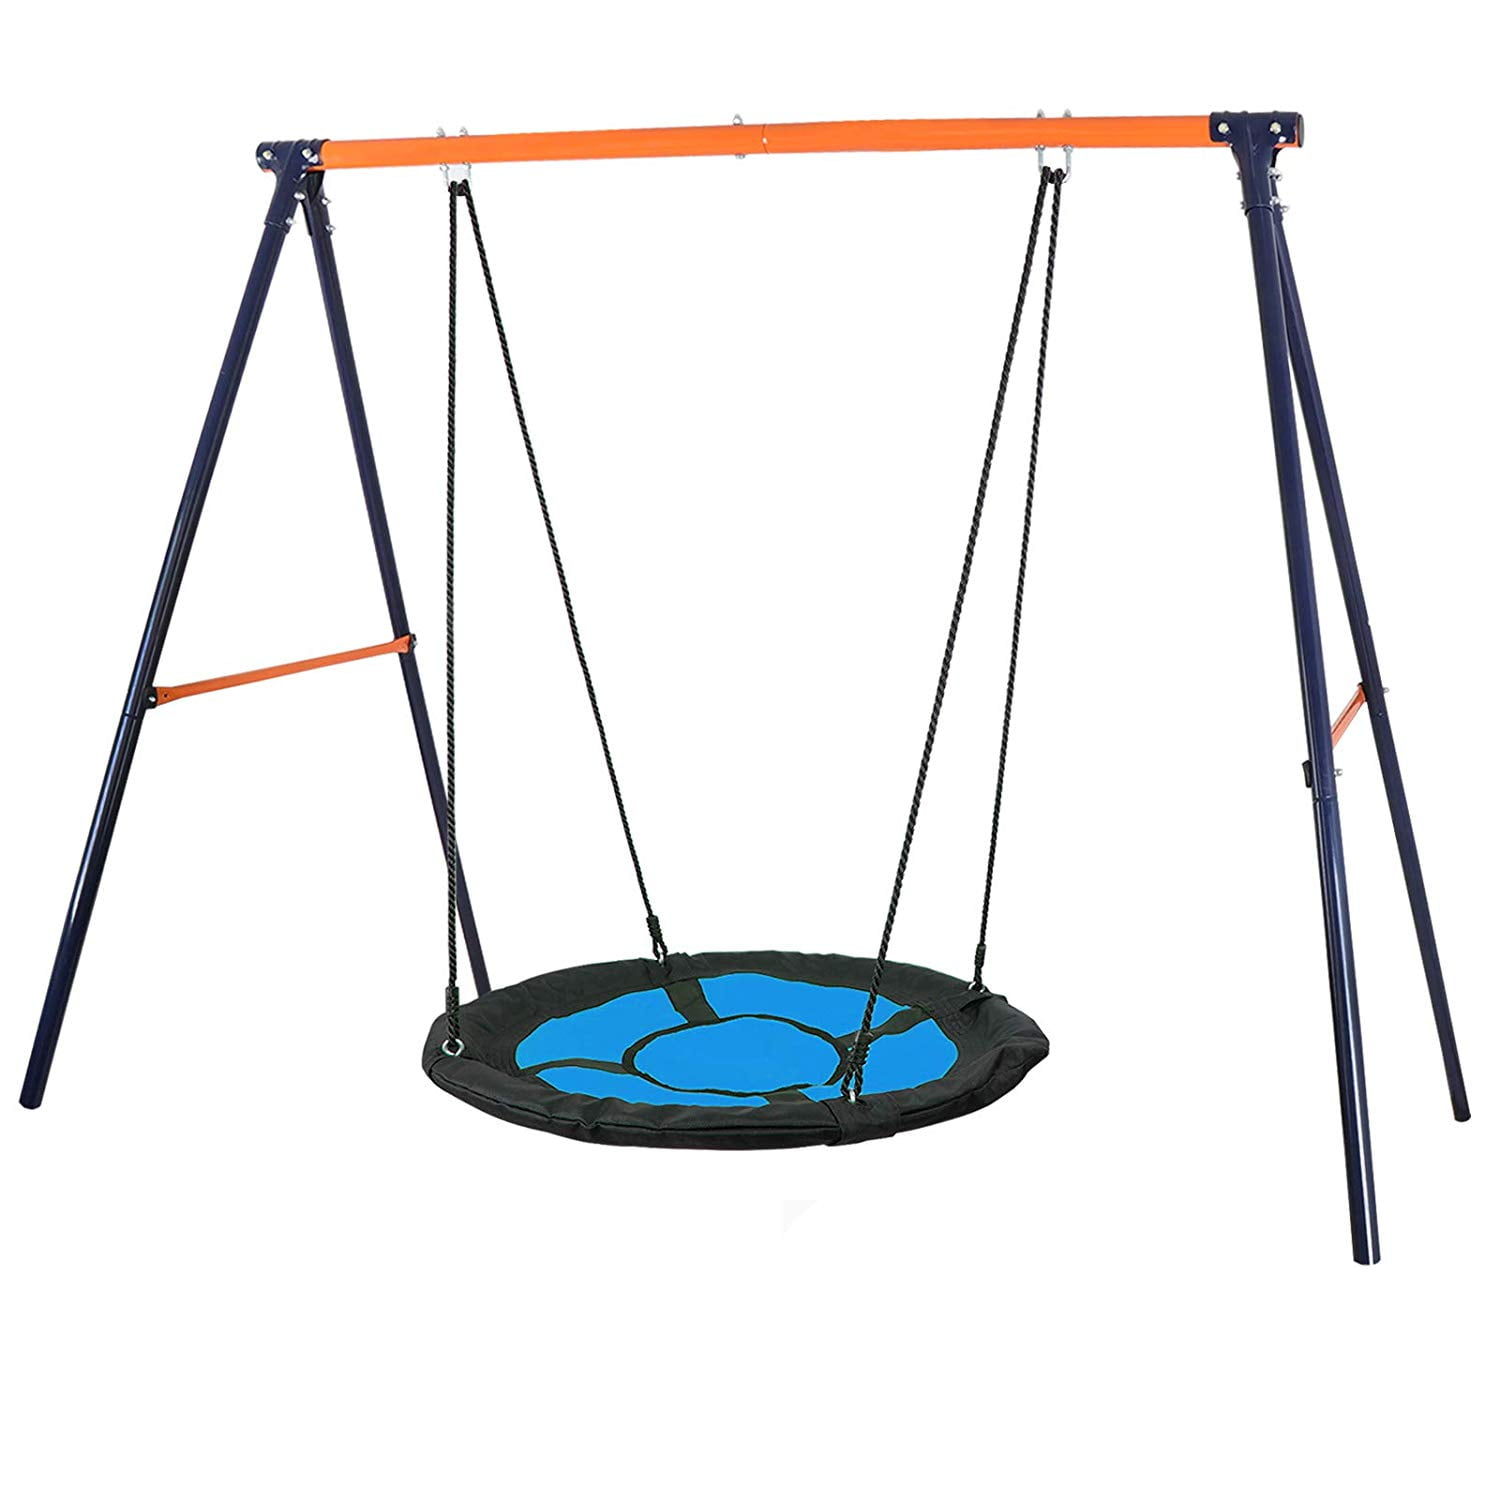 40" KidsTree Swing Saucer Swing Details about   72" Powder-Coat All-Steel All Weather Stand 